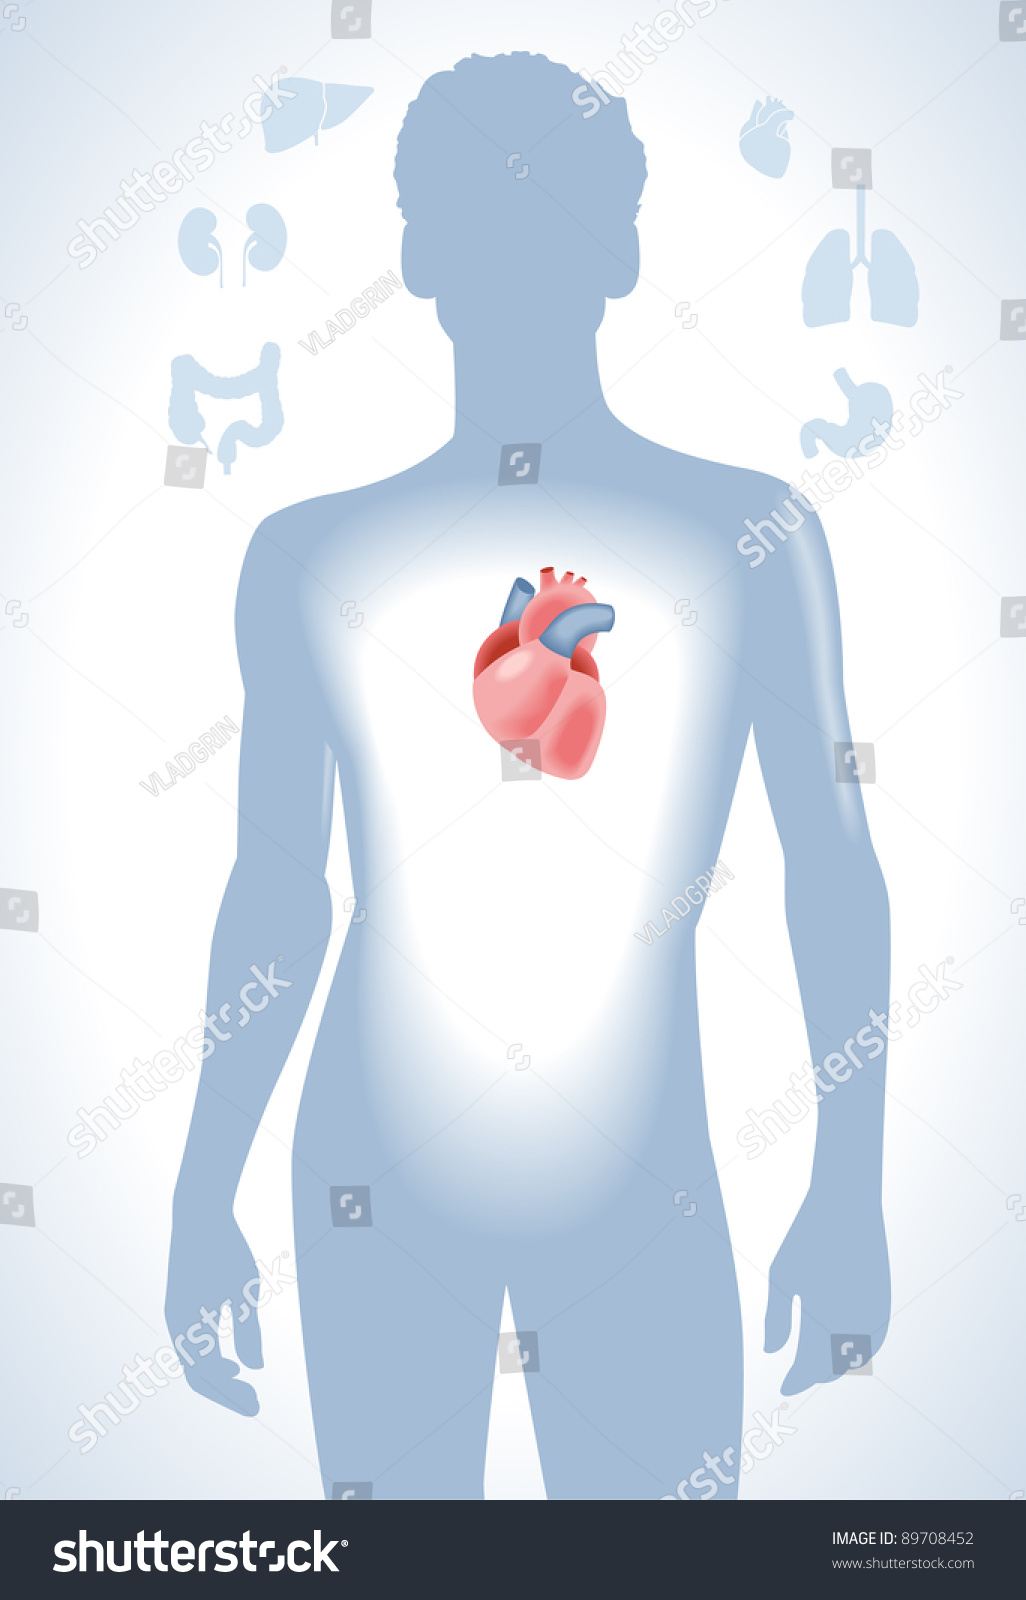 Set Of Human Anatomy Parts  Liver  Heart  Kidney  Lung